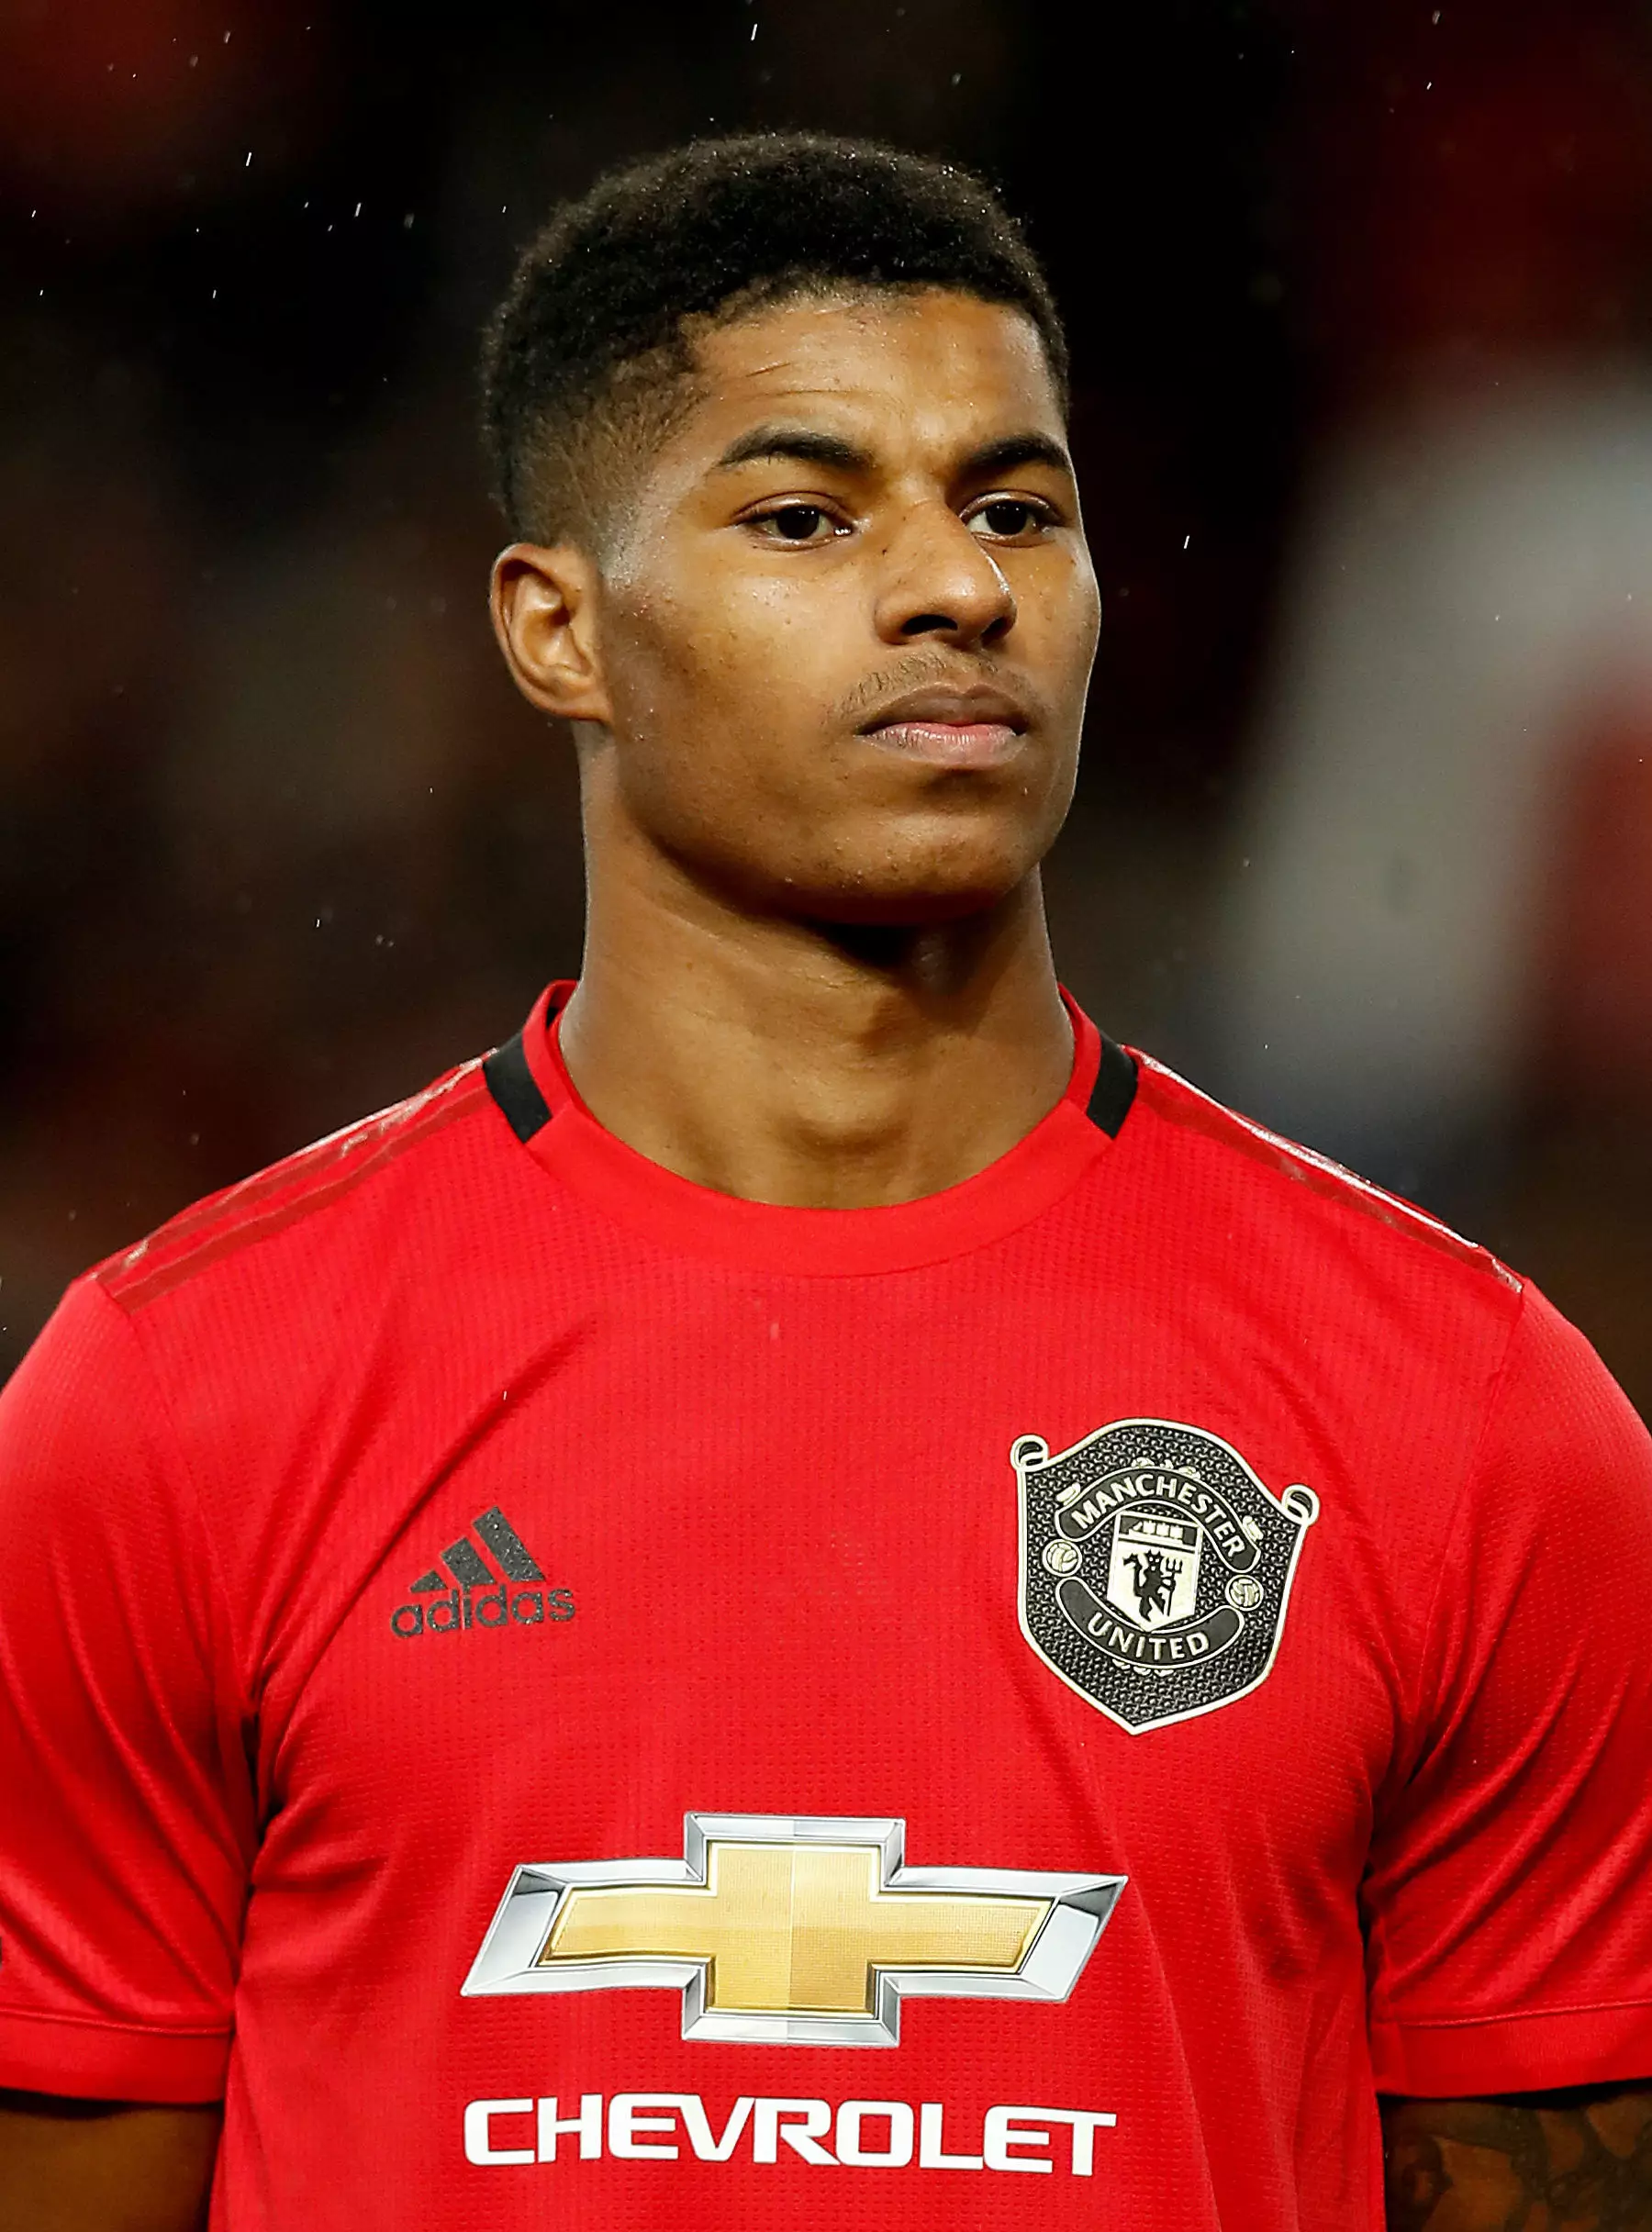 Marcus Rashford has led the efforts to make sure no child goes hungry.